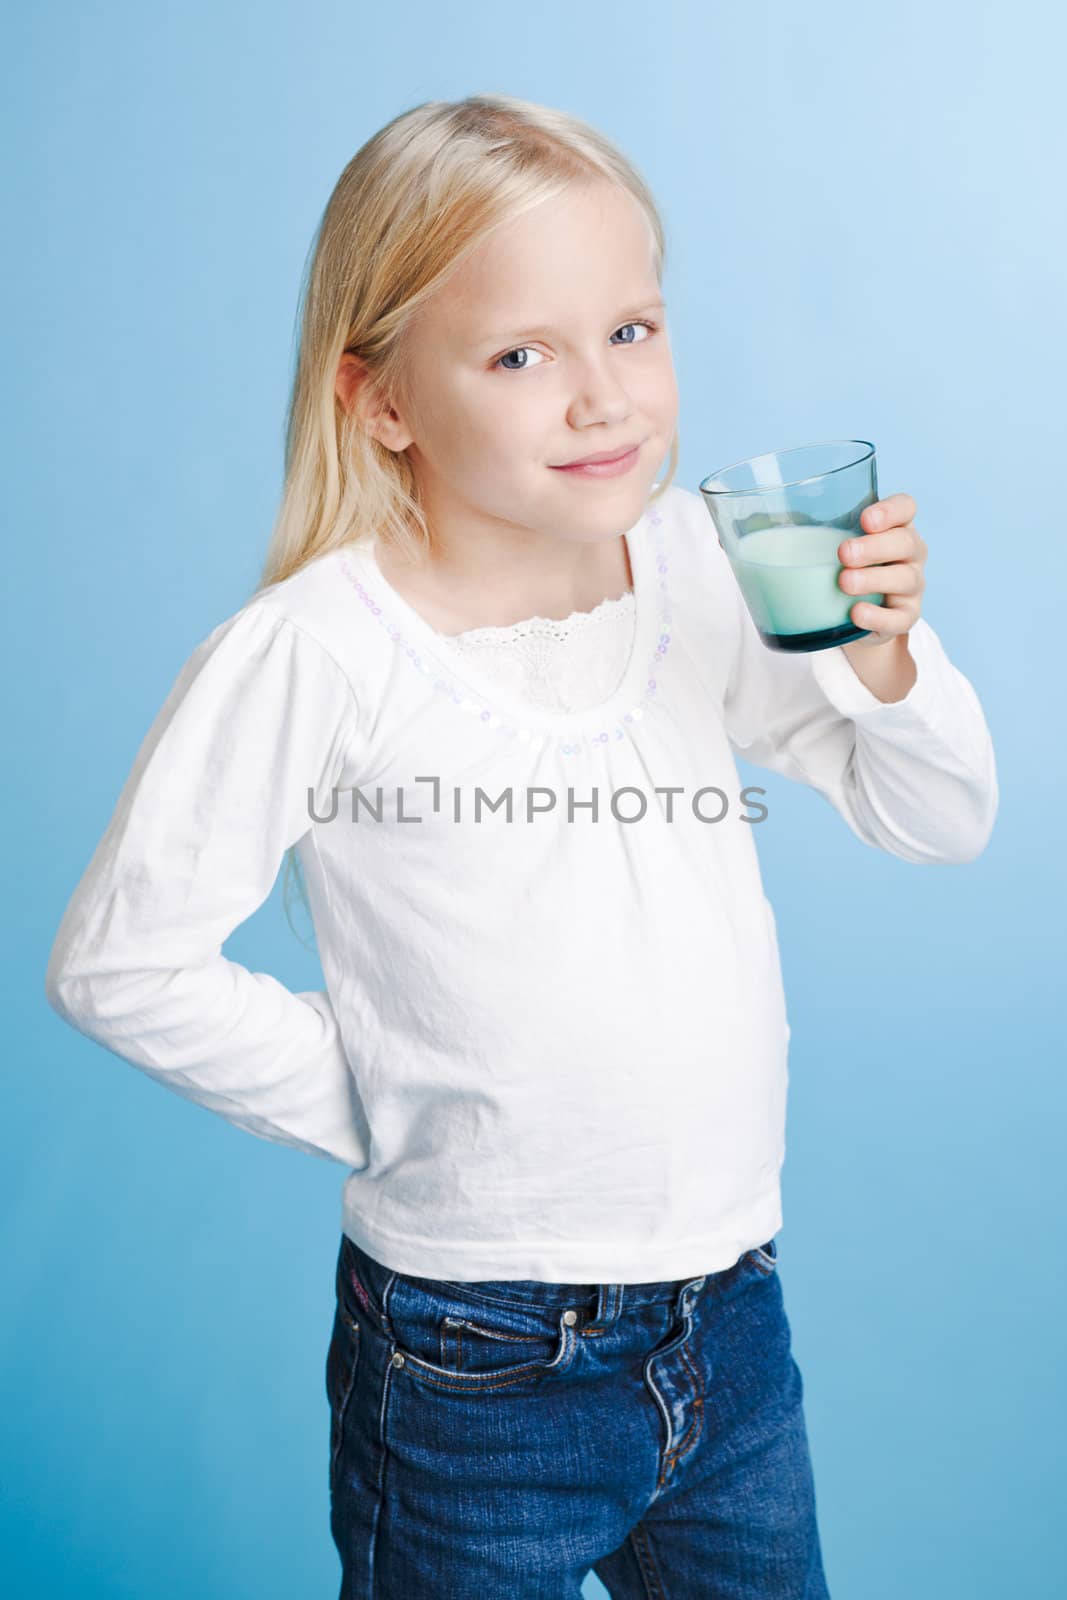 Young girl holding milk glass over a blue background